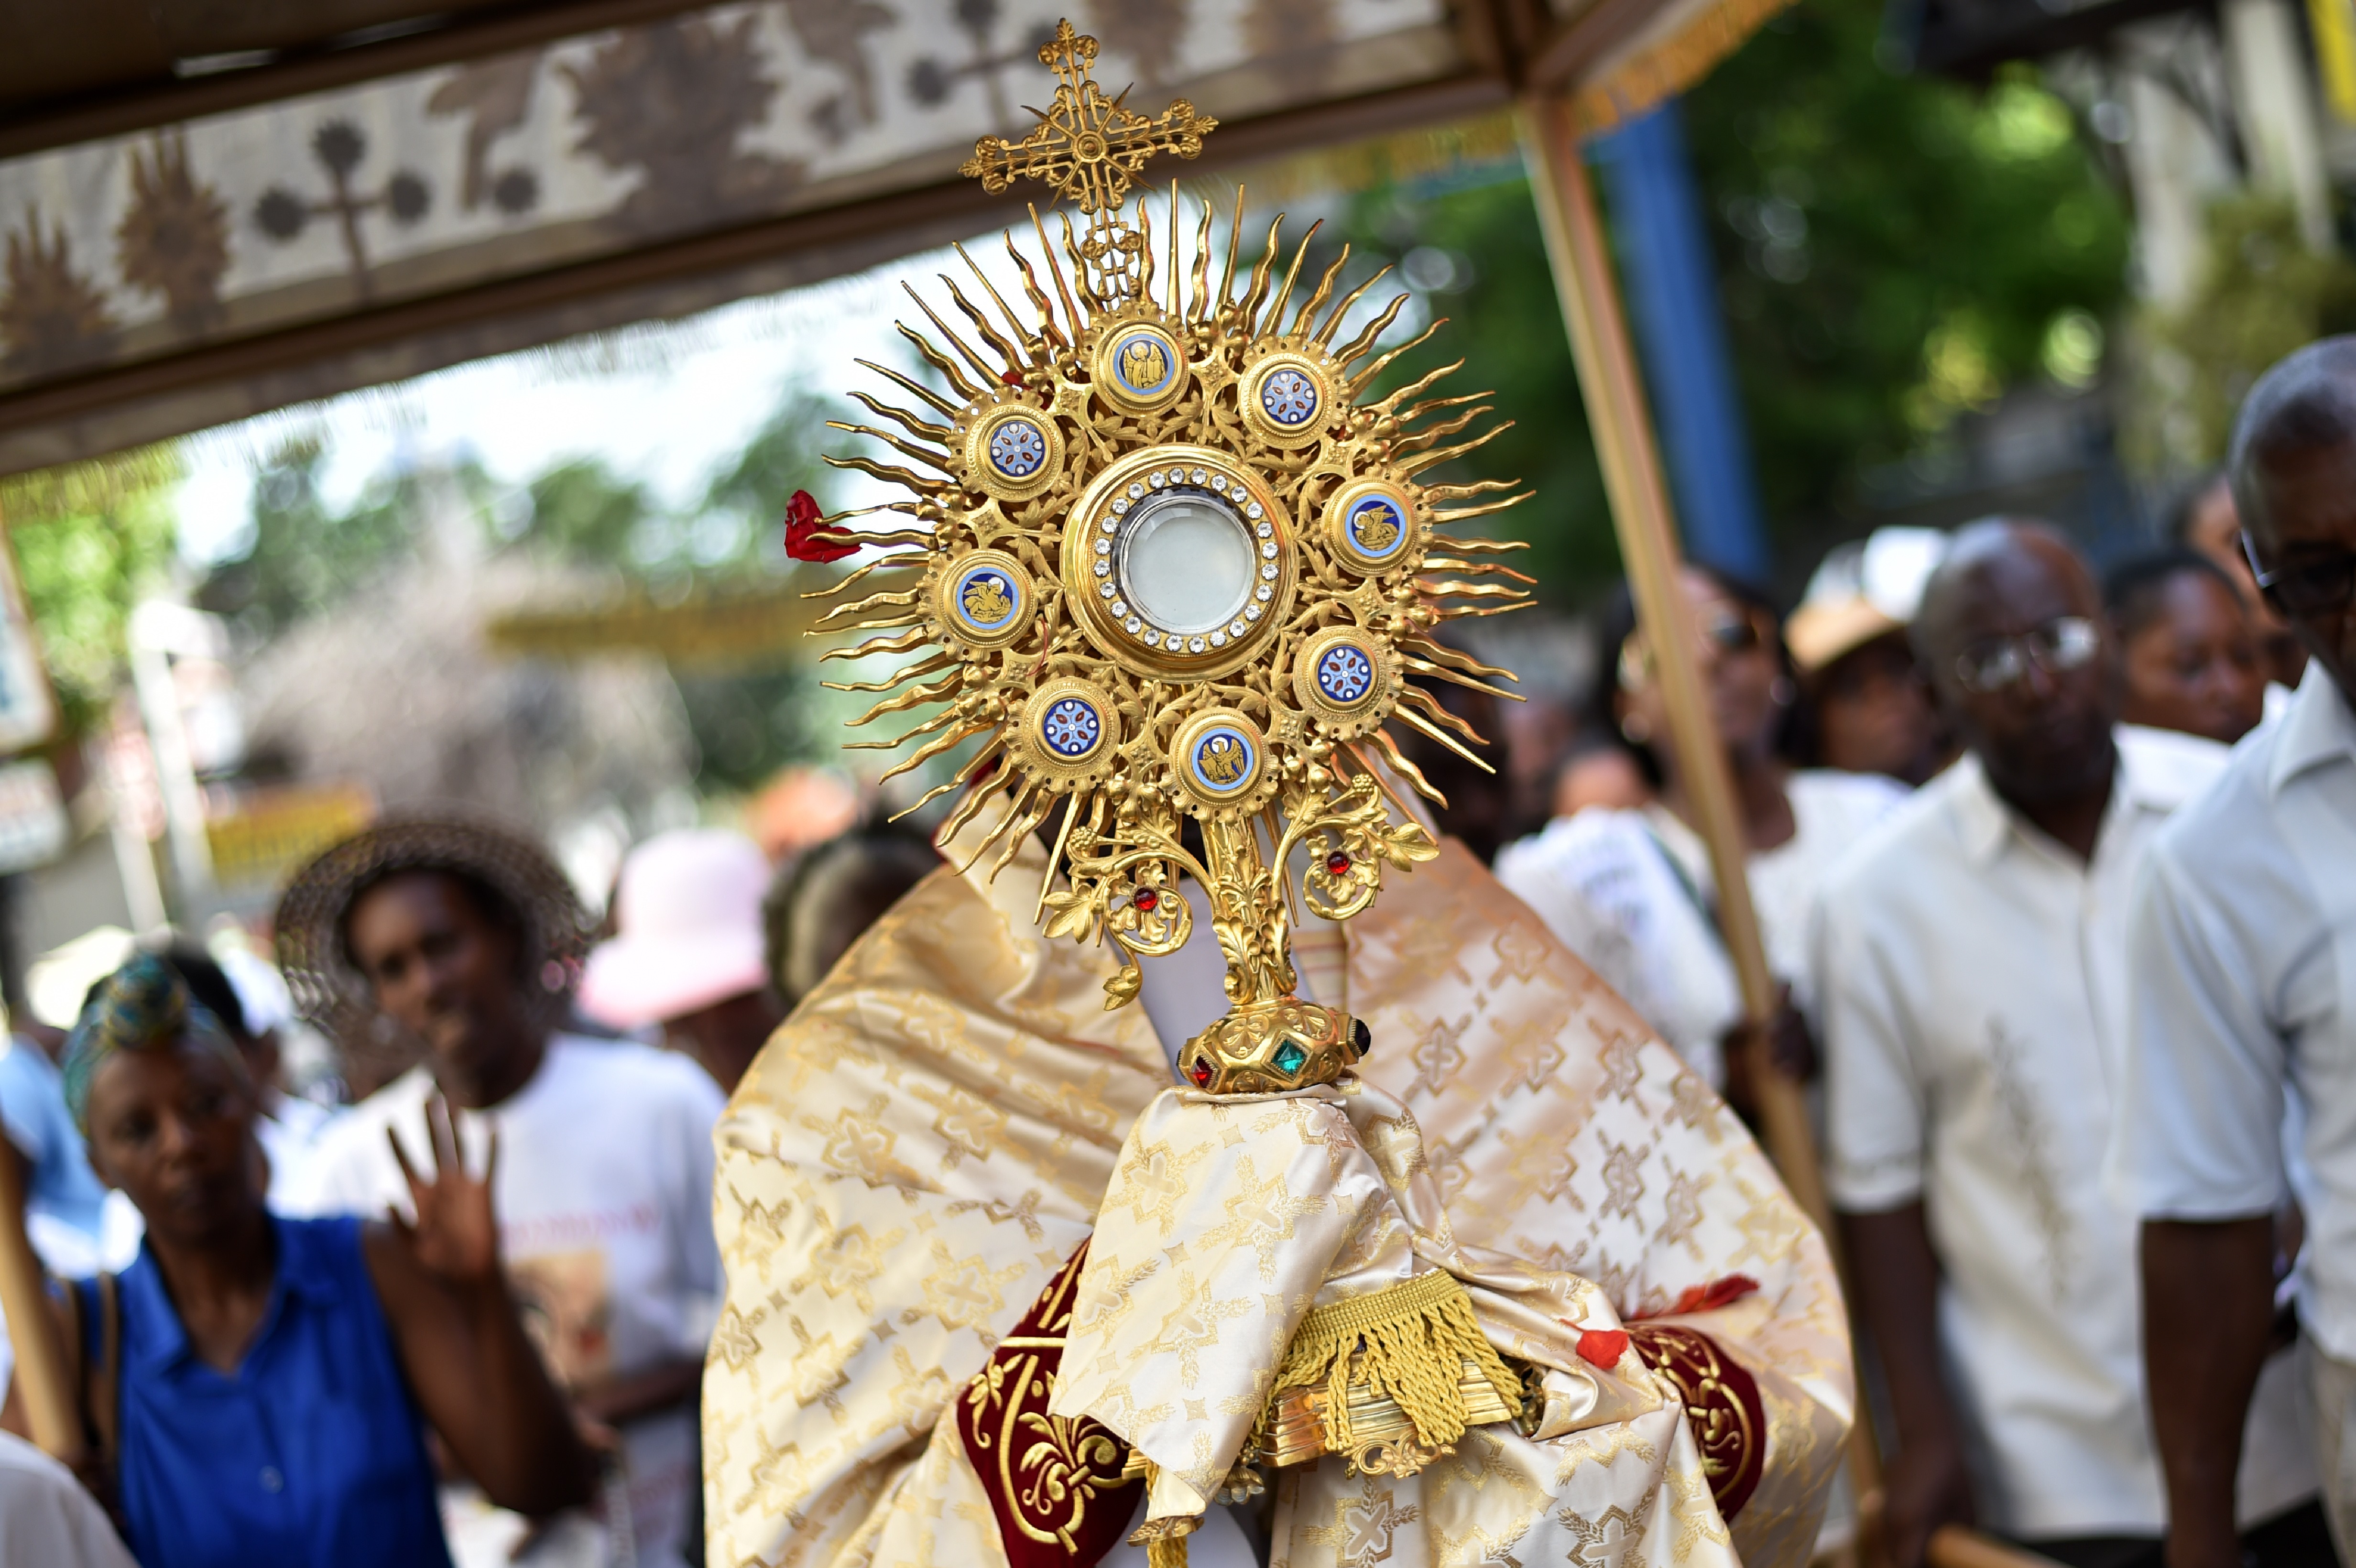 Catholic faithfuls participate in the Procession of the Feast of God (Procession de la Fete Dieu, in French) to mark the celebration of Corpus Christi, in the commune of Petion Ville, Port-au-Prince, on June 15, 2017.  / AFP PHOTO / HECTOR RETAMAL        (Photo credit should read HECTOR RETAMAL/AFP/Getty Images)